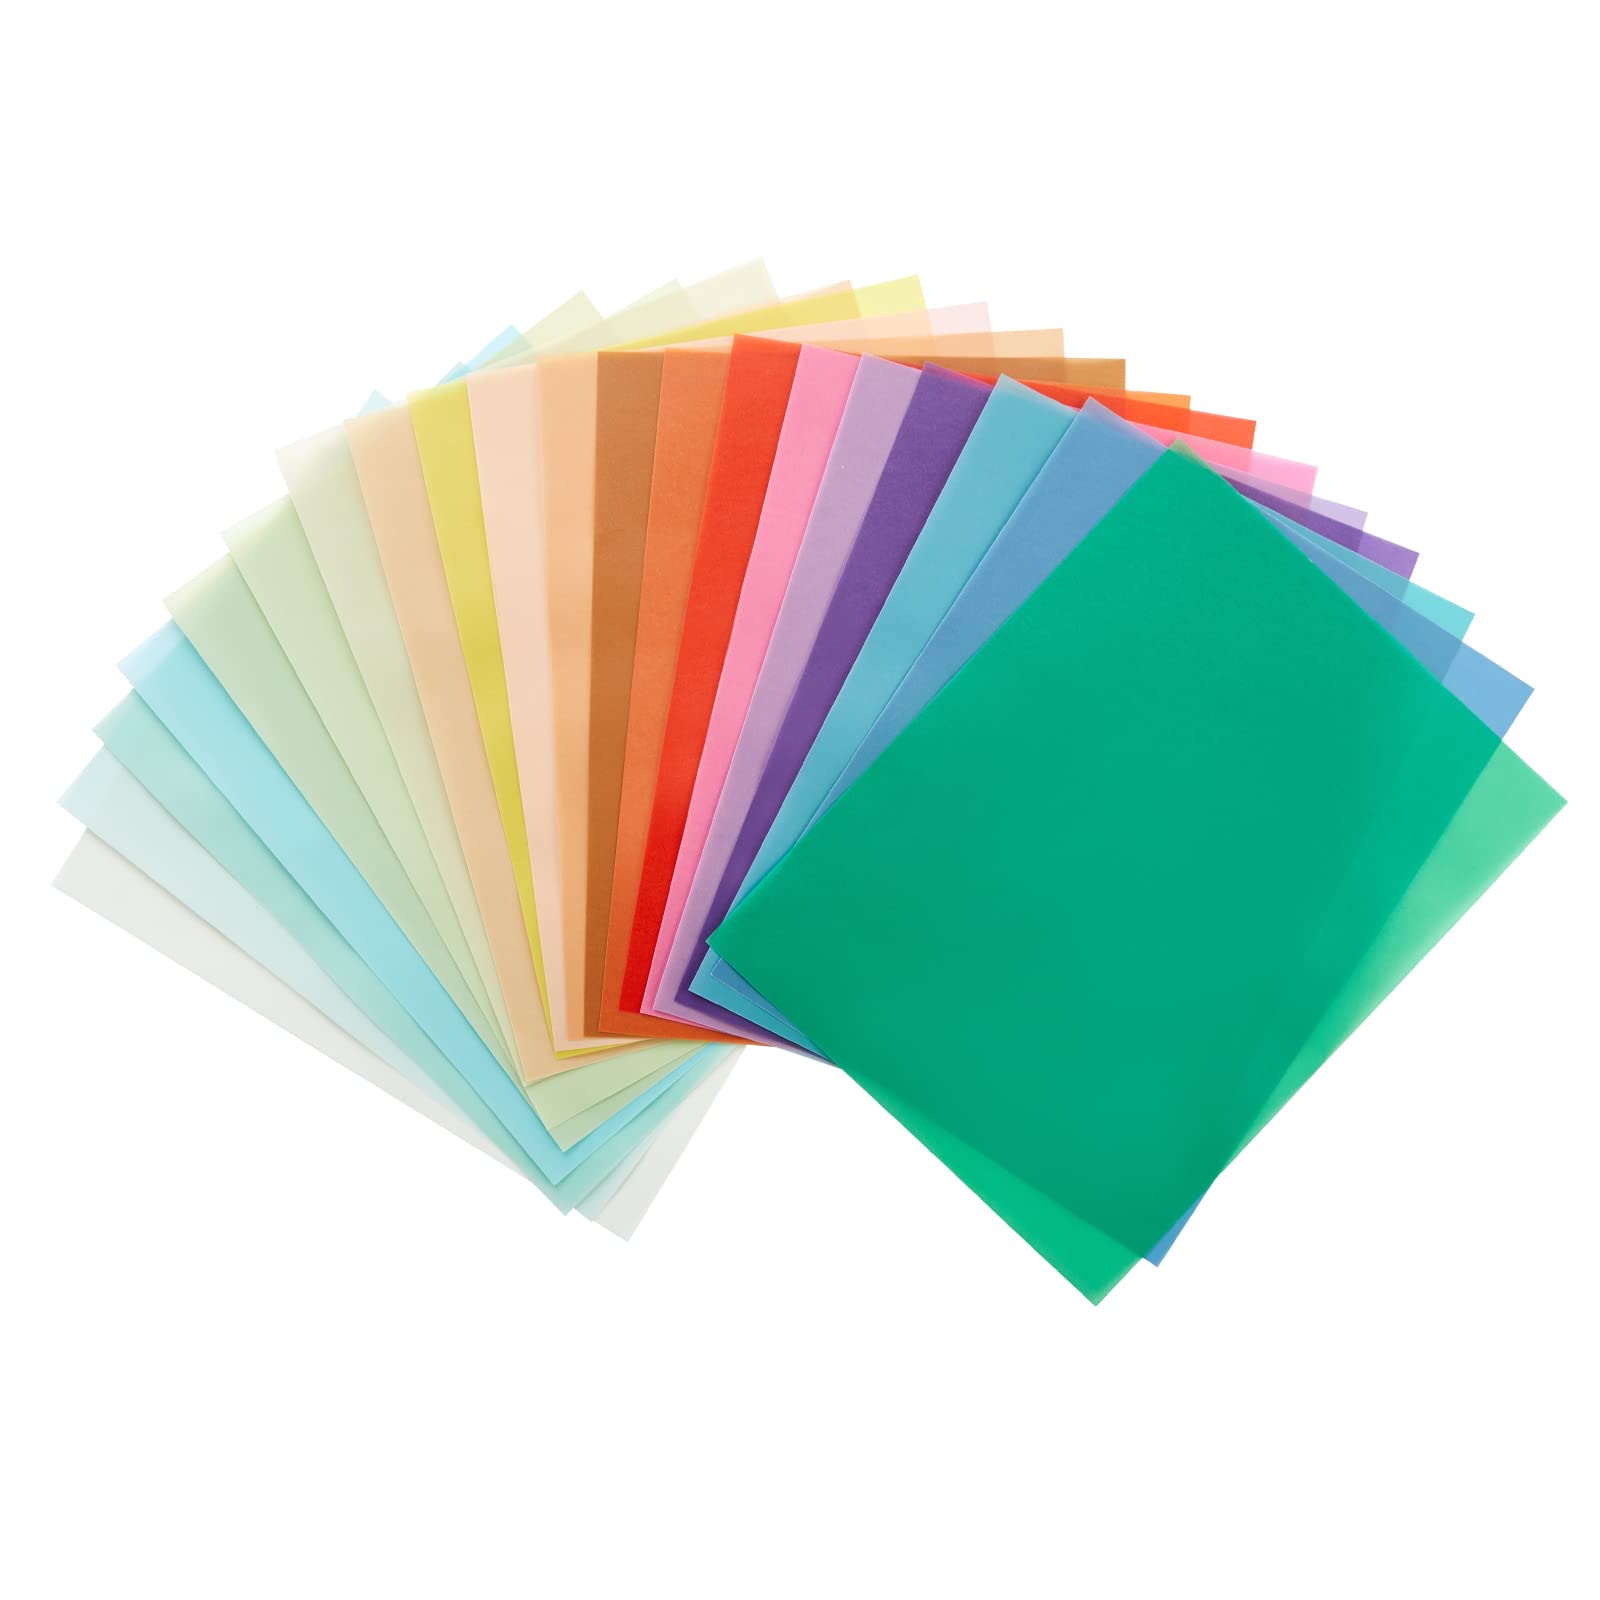 Colored Vellum Paper,20colors,100sheets 8.5*11 inch Transparent Tracing  Paper for Sketching,Invitations,DIY